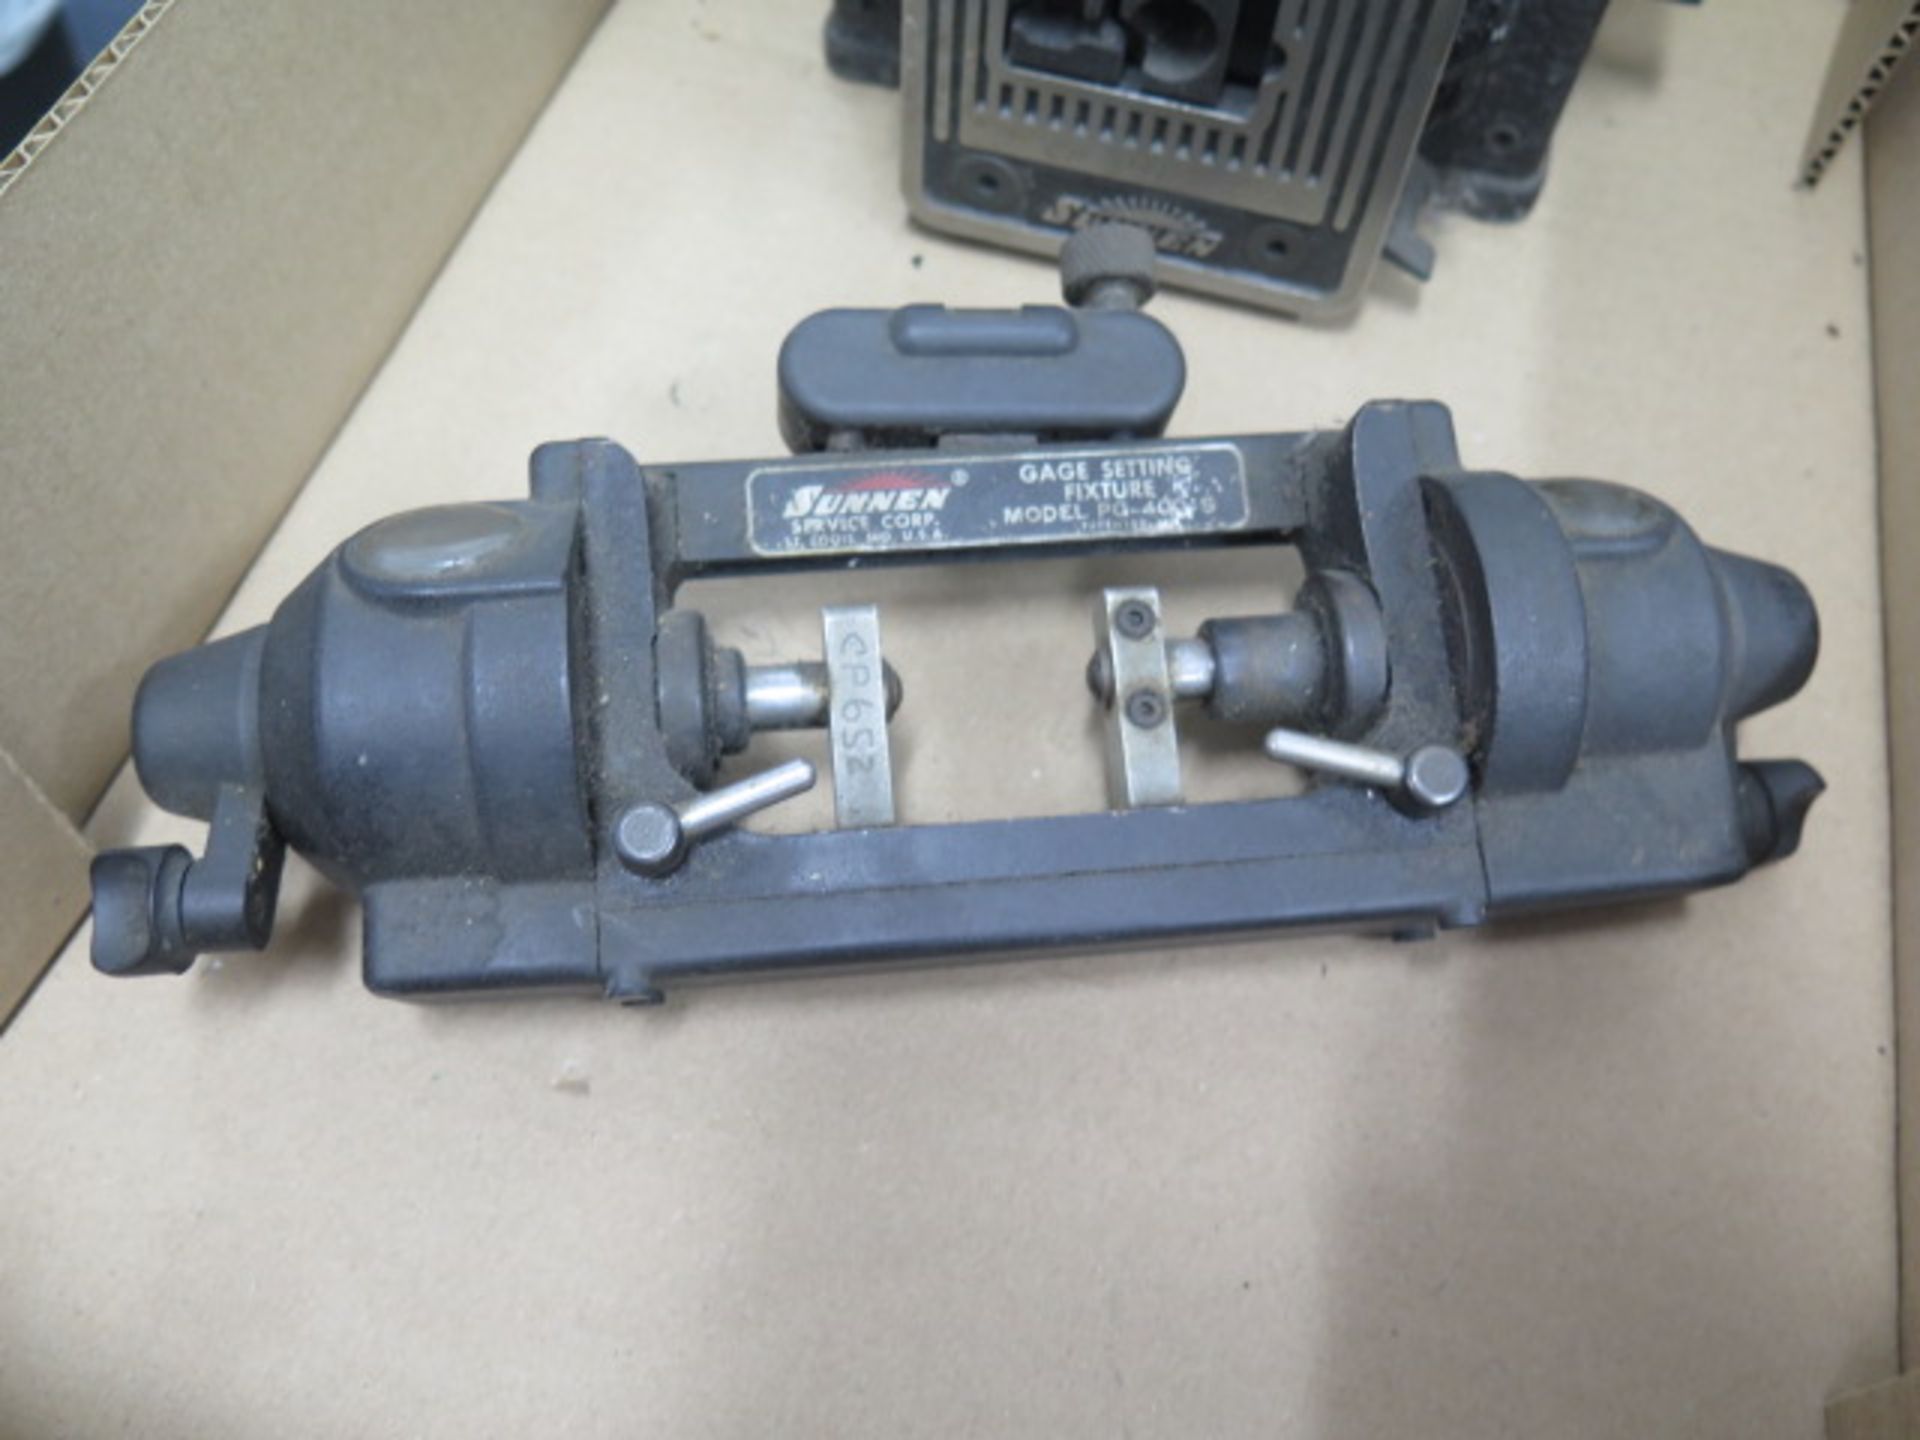 Sunnen PG-700 Precision Bore Gage w/ Sunnen PG-400S Setting Fixture (SOLD AS-IS - NO WARRANTY) - Image 6 of 7